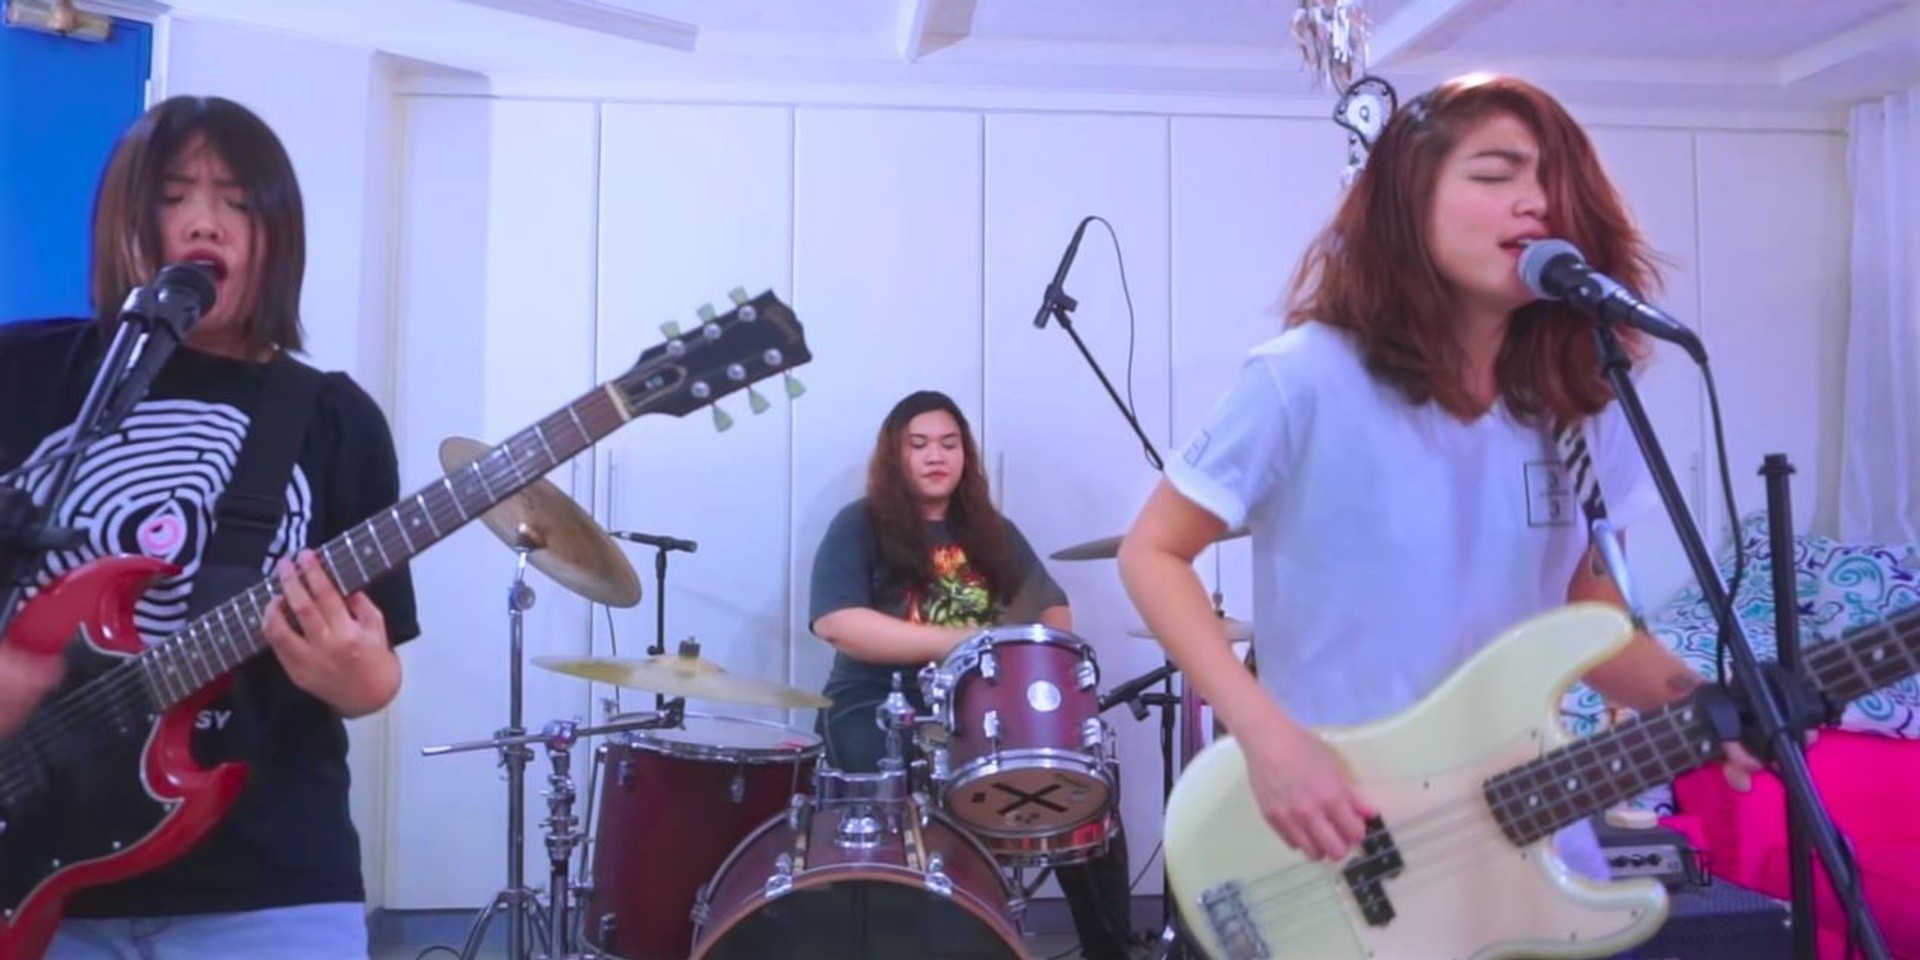 3/3 share live performance video for 'Wr U At?' – watch